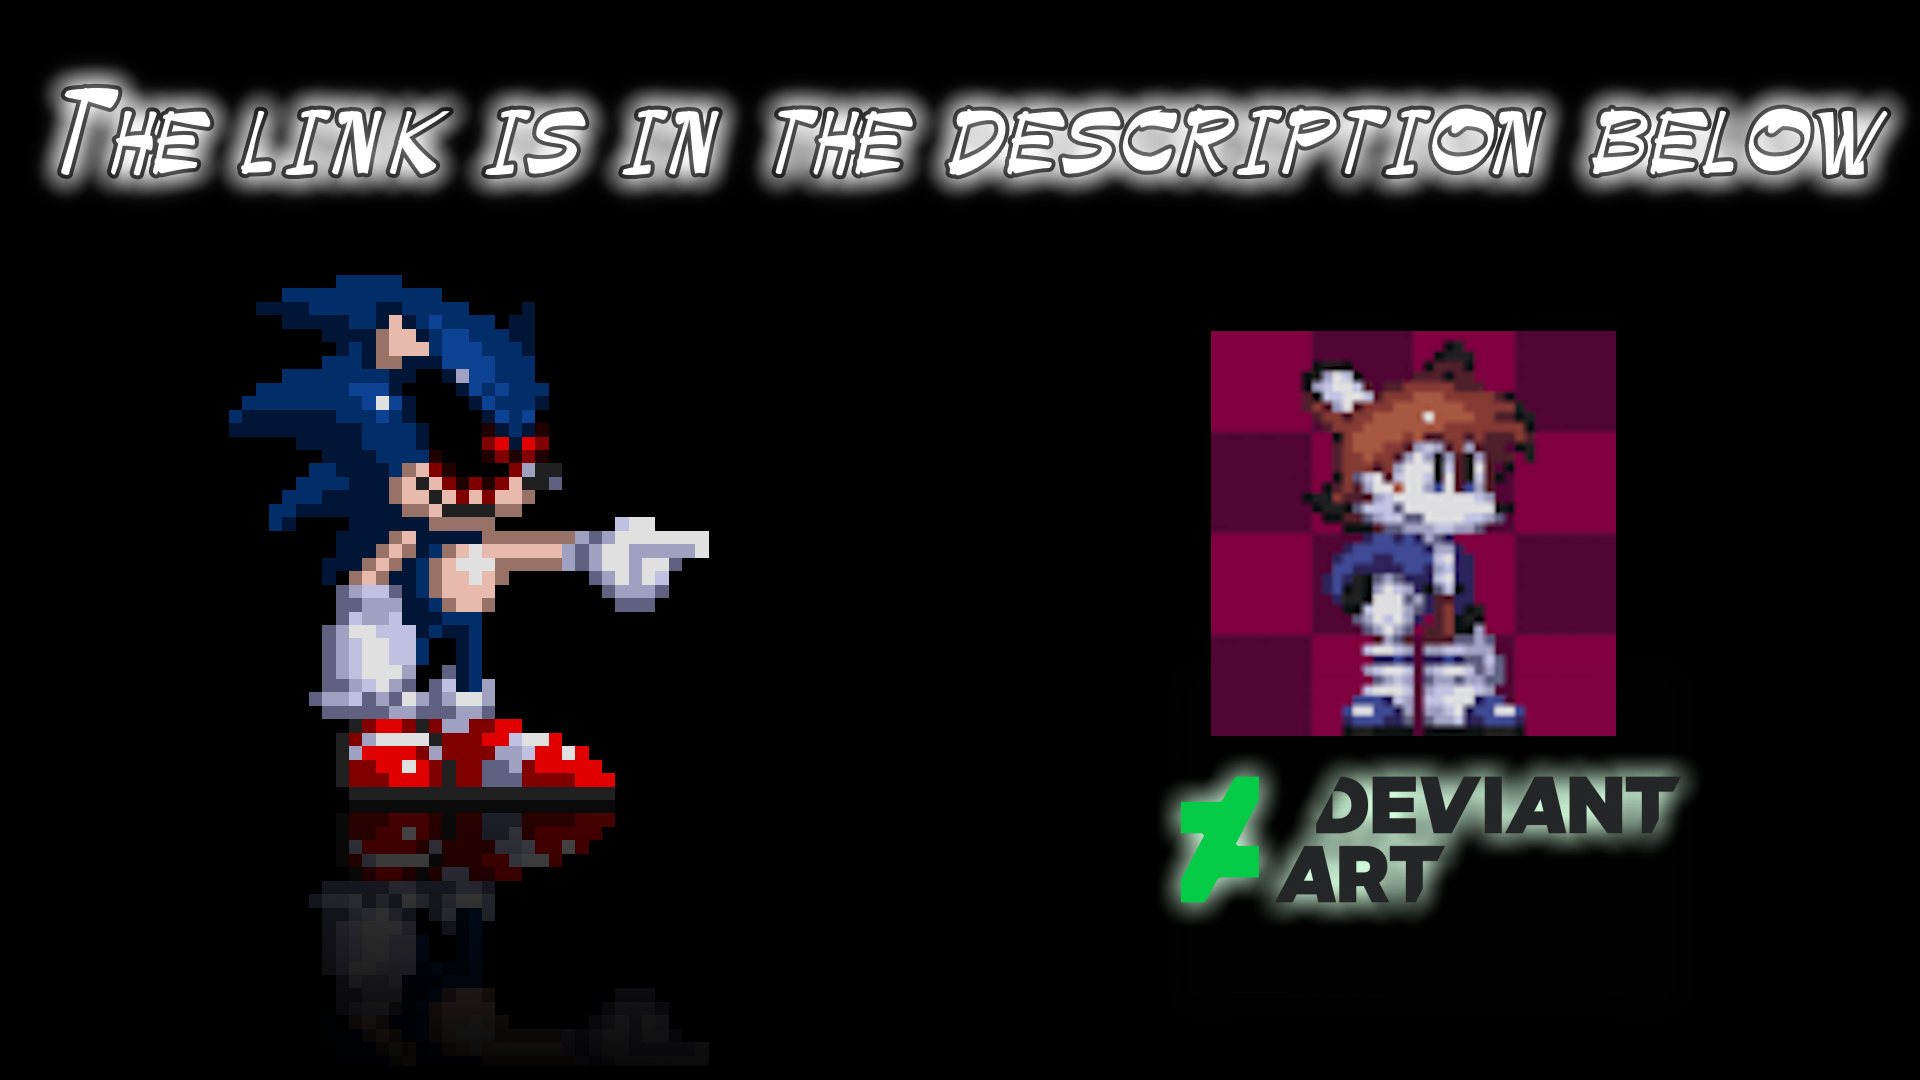 Sonic.EXE The Disaster 2D Remake Characters Guide by Nifzy255 on DeviantArt